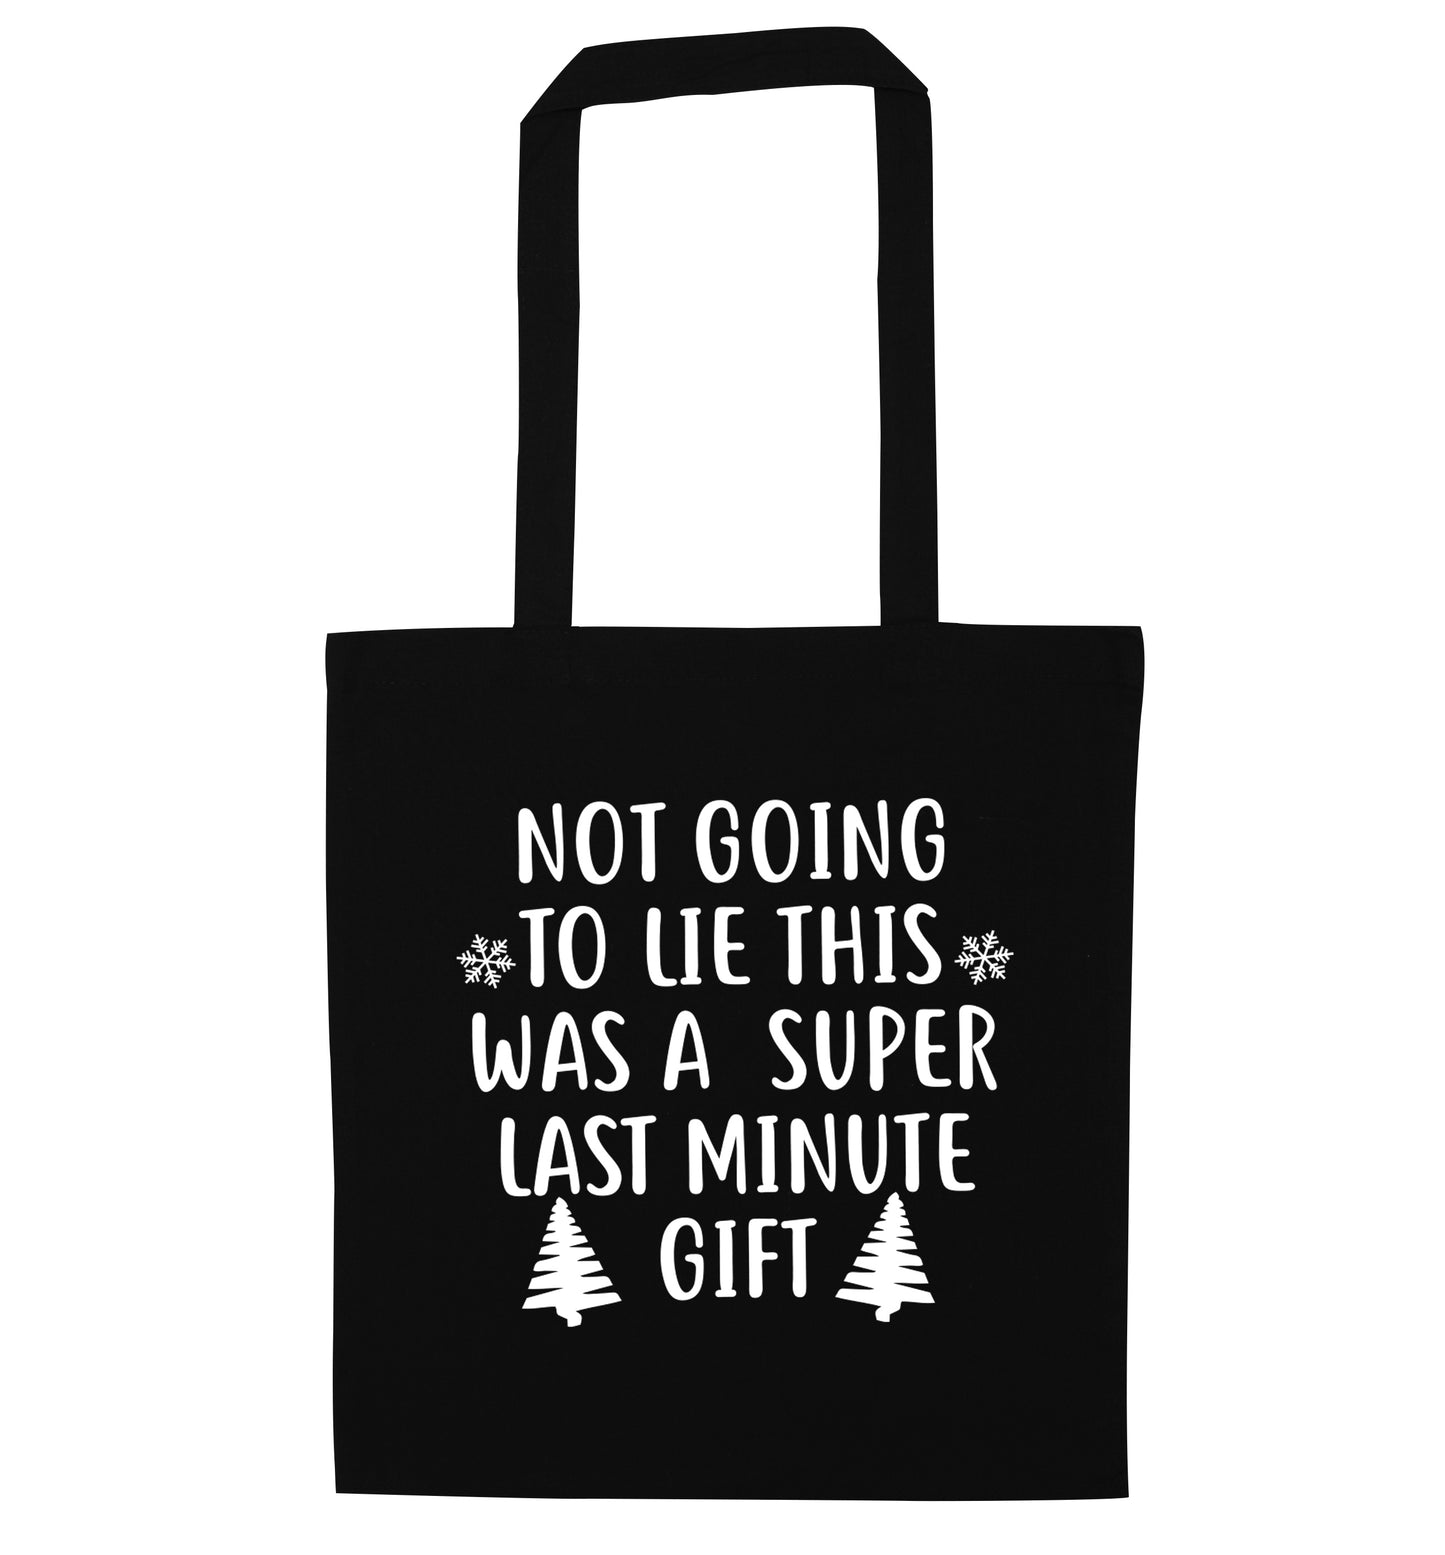 Not going to lie this was a super last minute gift black tote bag